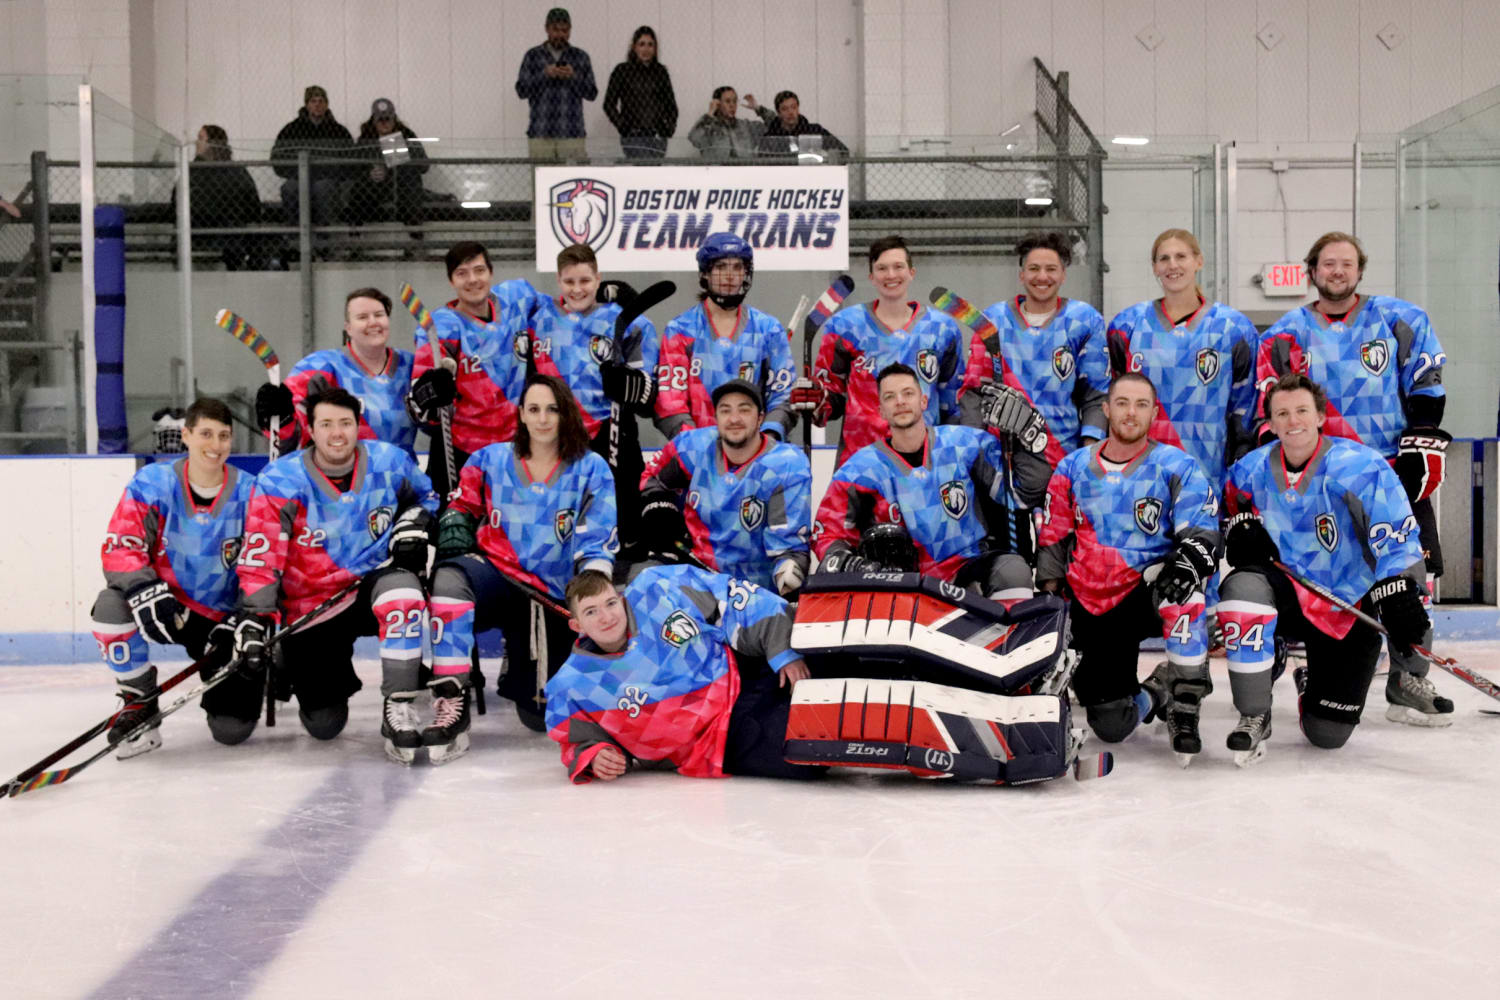 In Boston, the first trans hockey team takes the photo